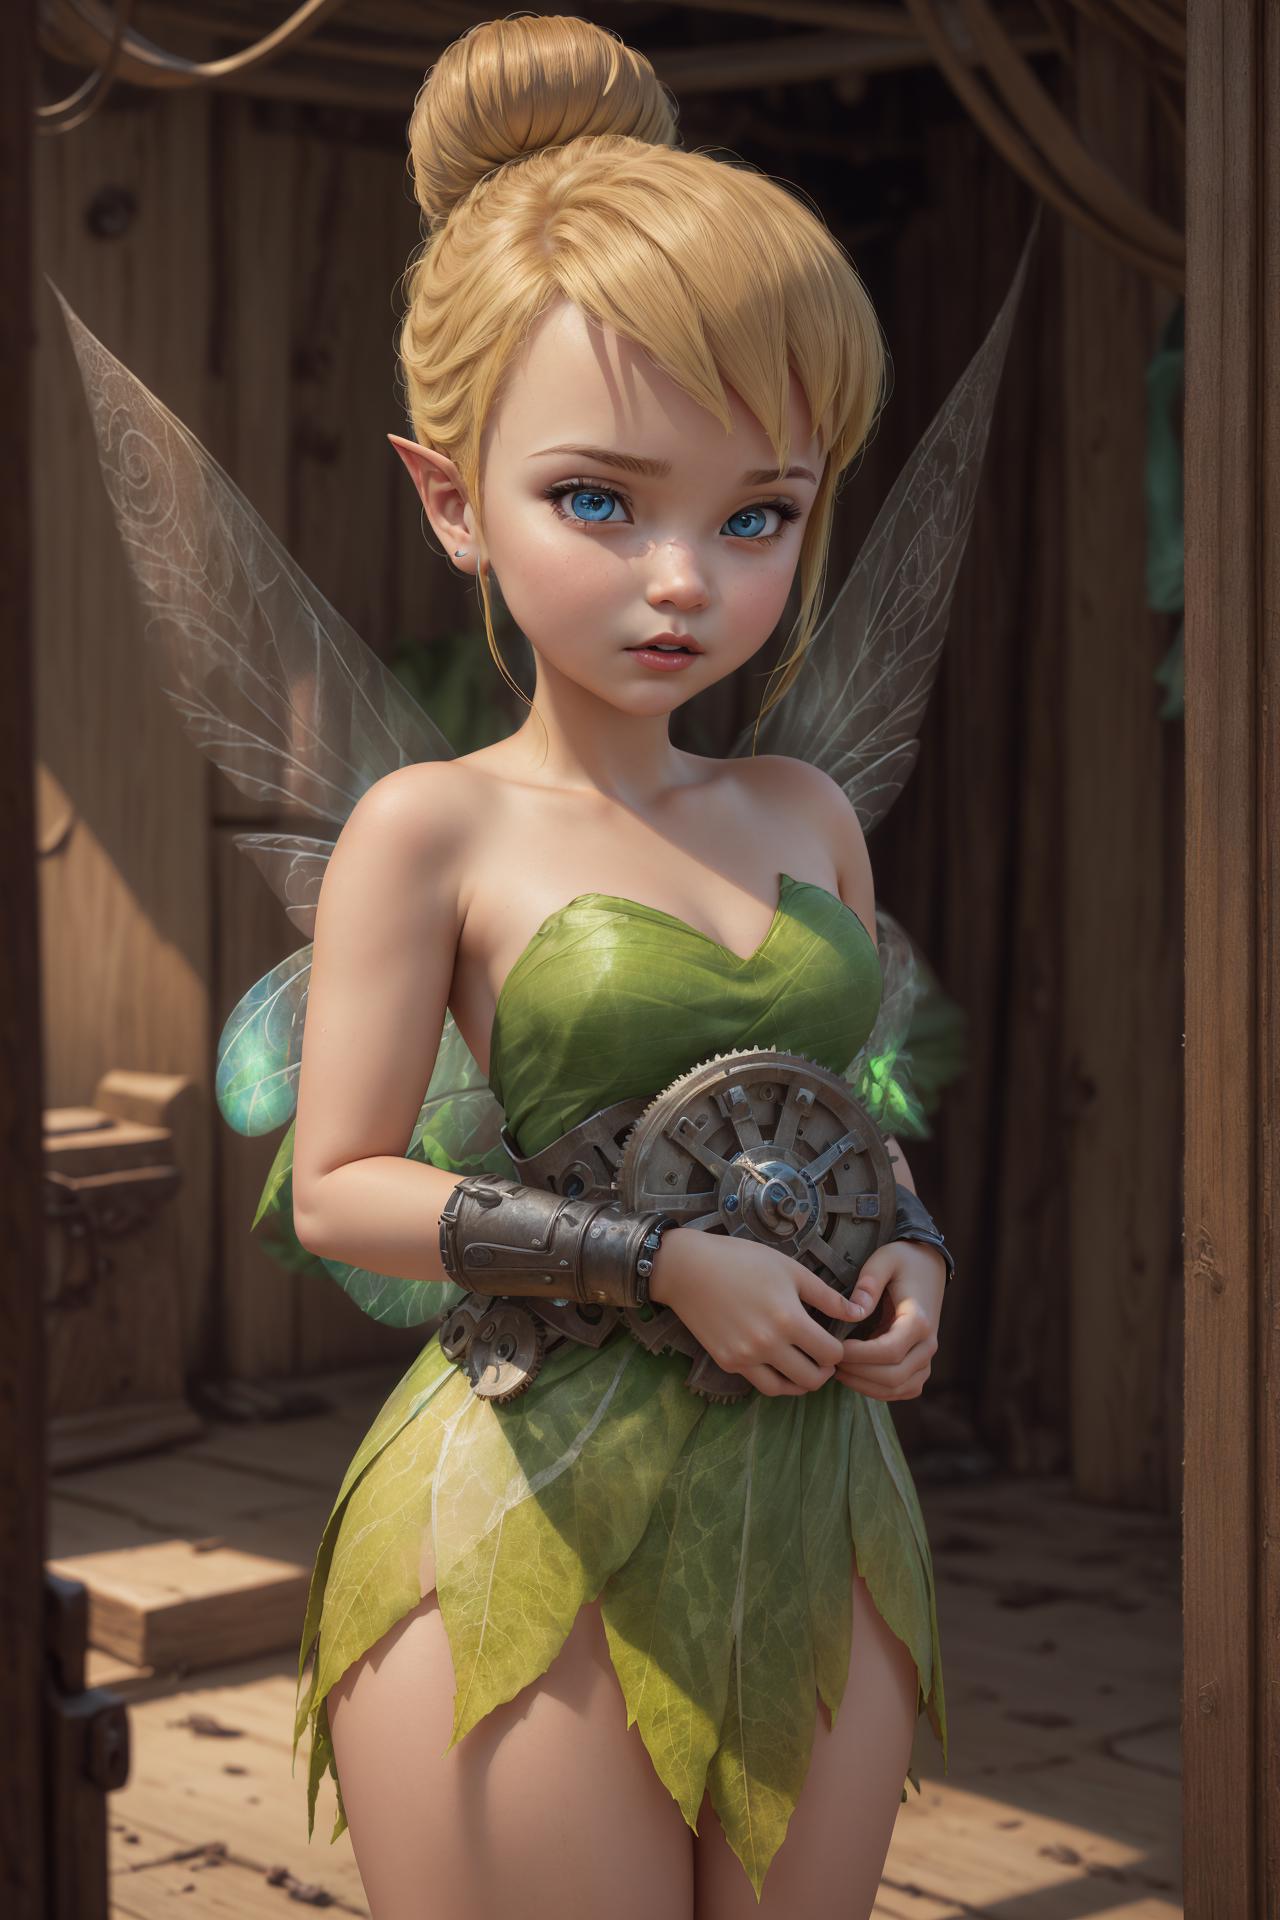 Tinker Bell in a green dress with a gear on her wrist.